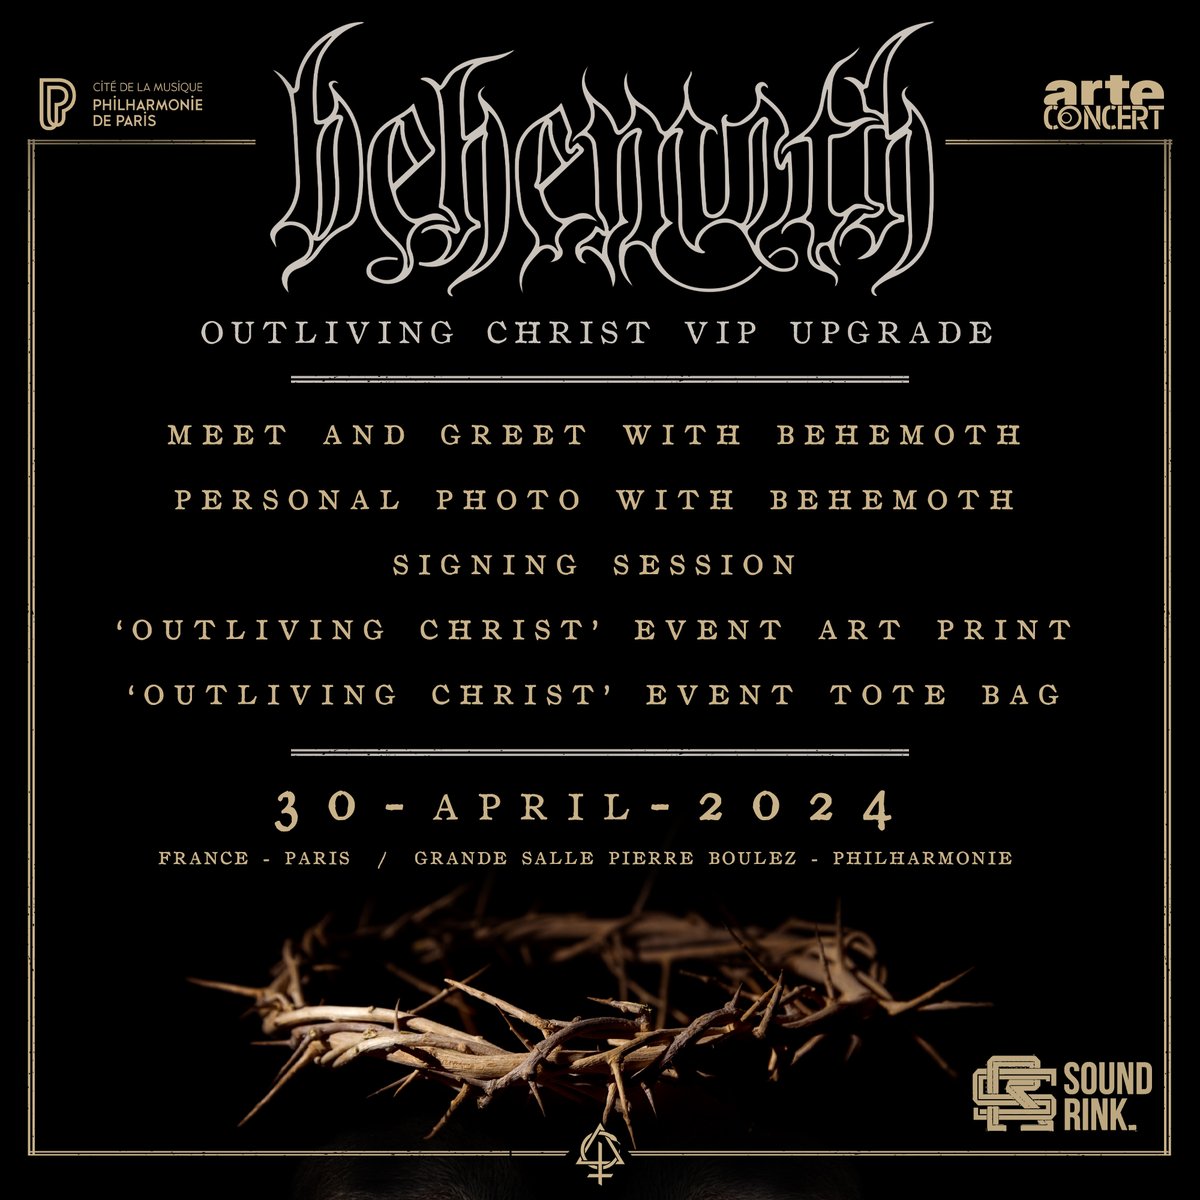 Limited VIP upgrades for 'Outliving Christ' at the Philharmonie de Paris are on sale now! Including: Meet and Greet with Behemoth Personal Photo with Behemoth Signing Session 'Outliving Christ’ Event Art Print ‘Outliving Christ’ Event Tote Bag outlivingchrist.soundrink.com